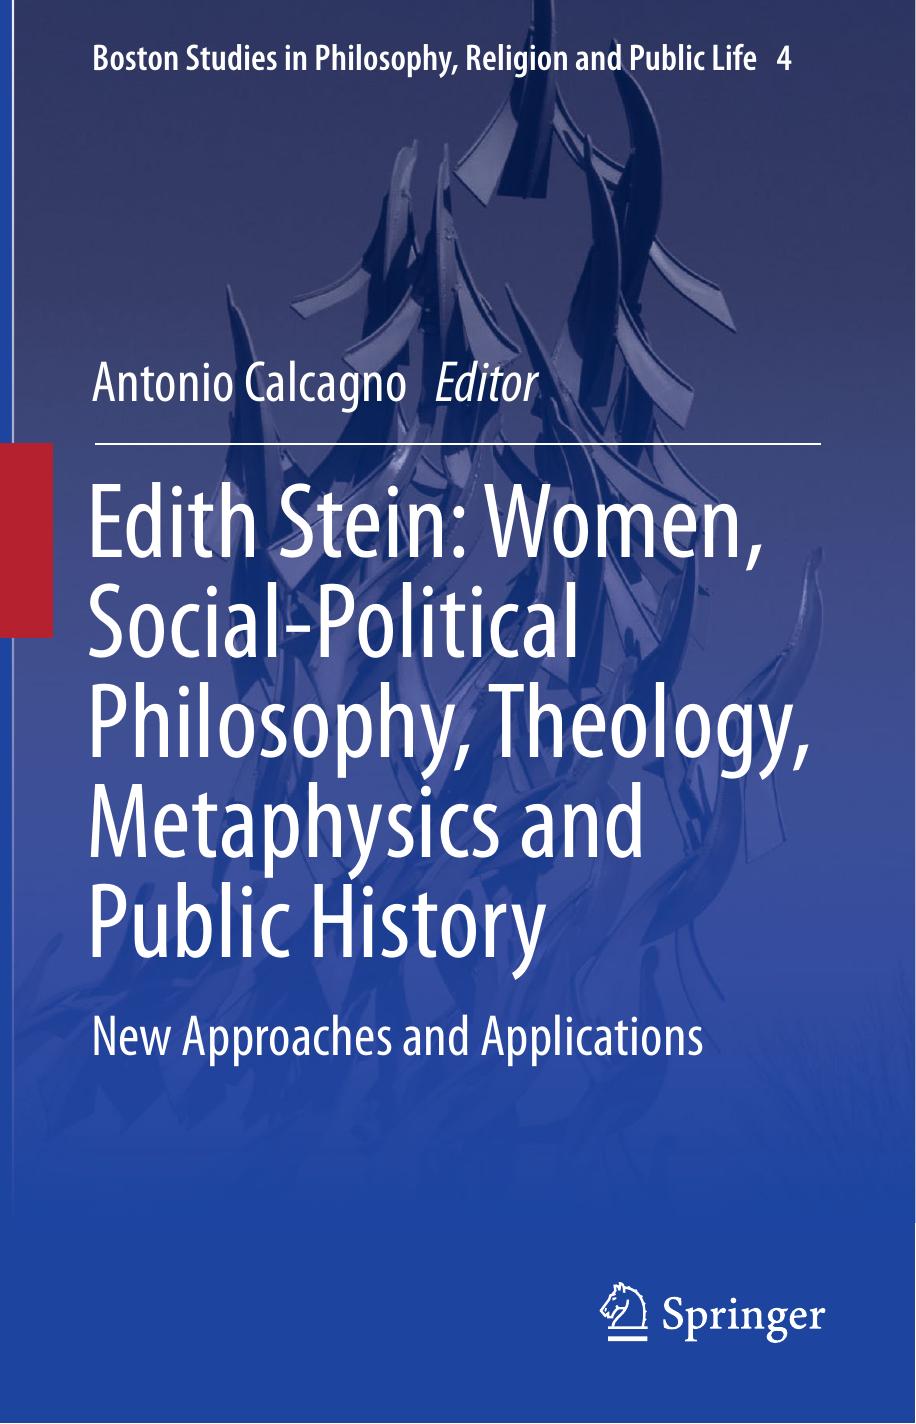 Edith Stein Women, Social-Political Philosophy, Theology, Metaphysics and Public History  New Approaches, 2016